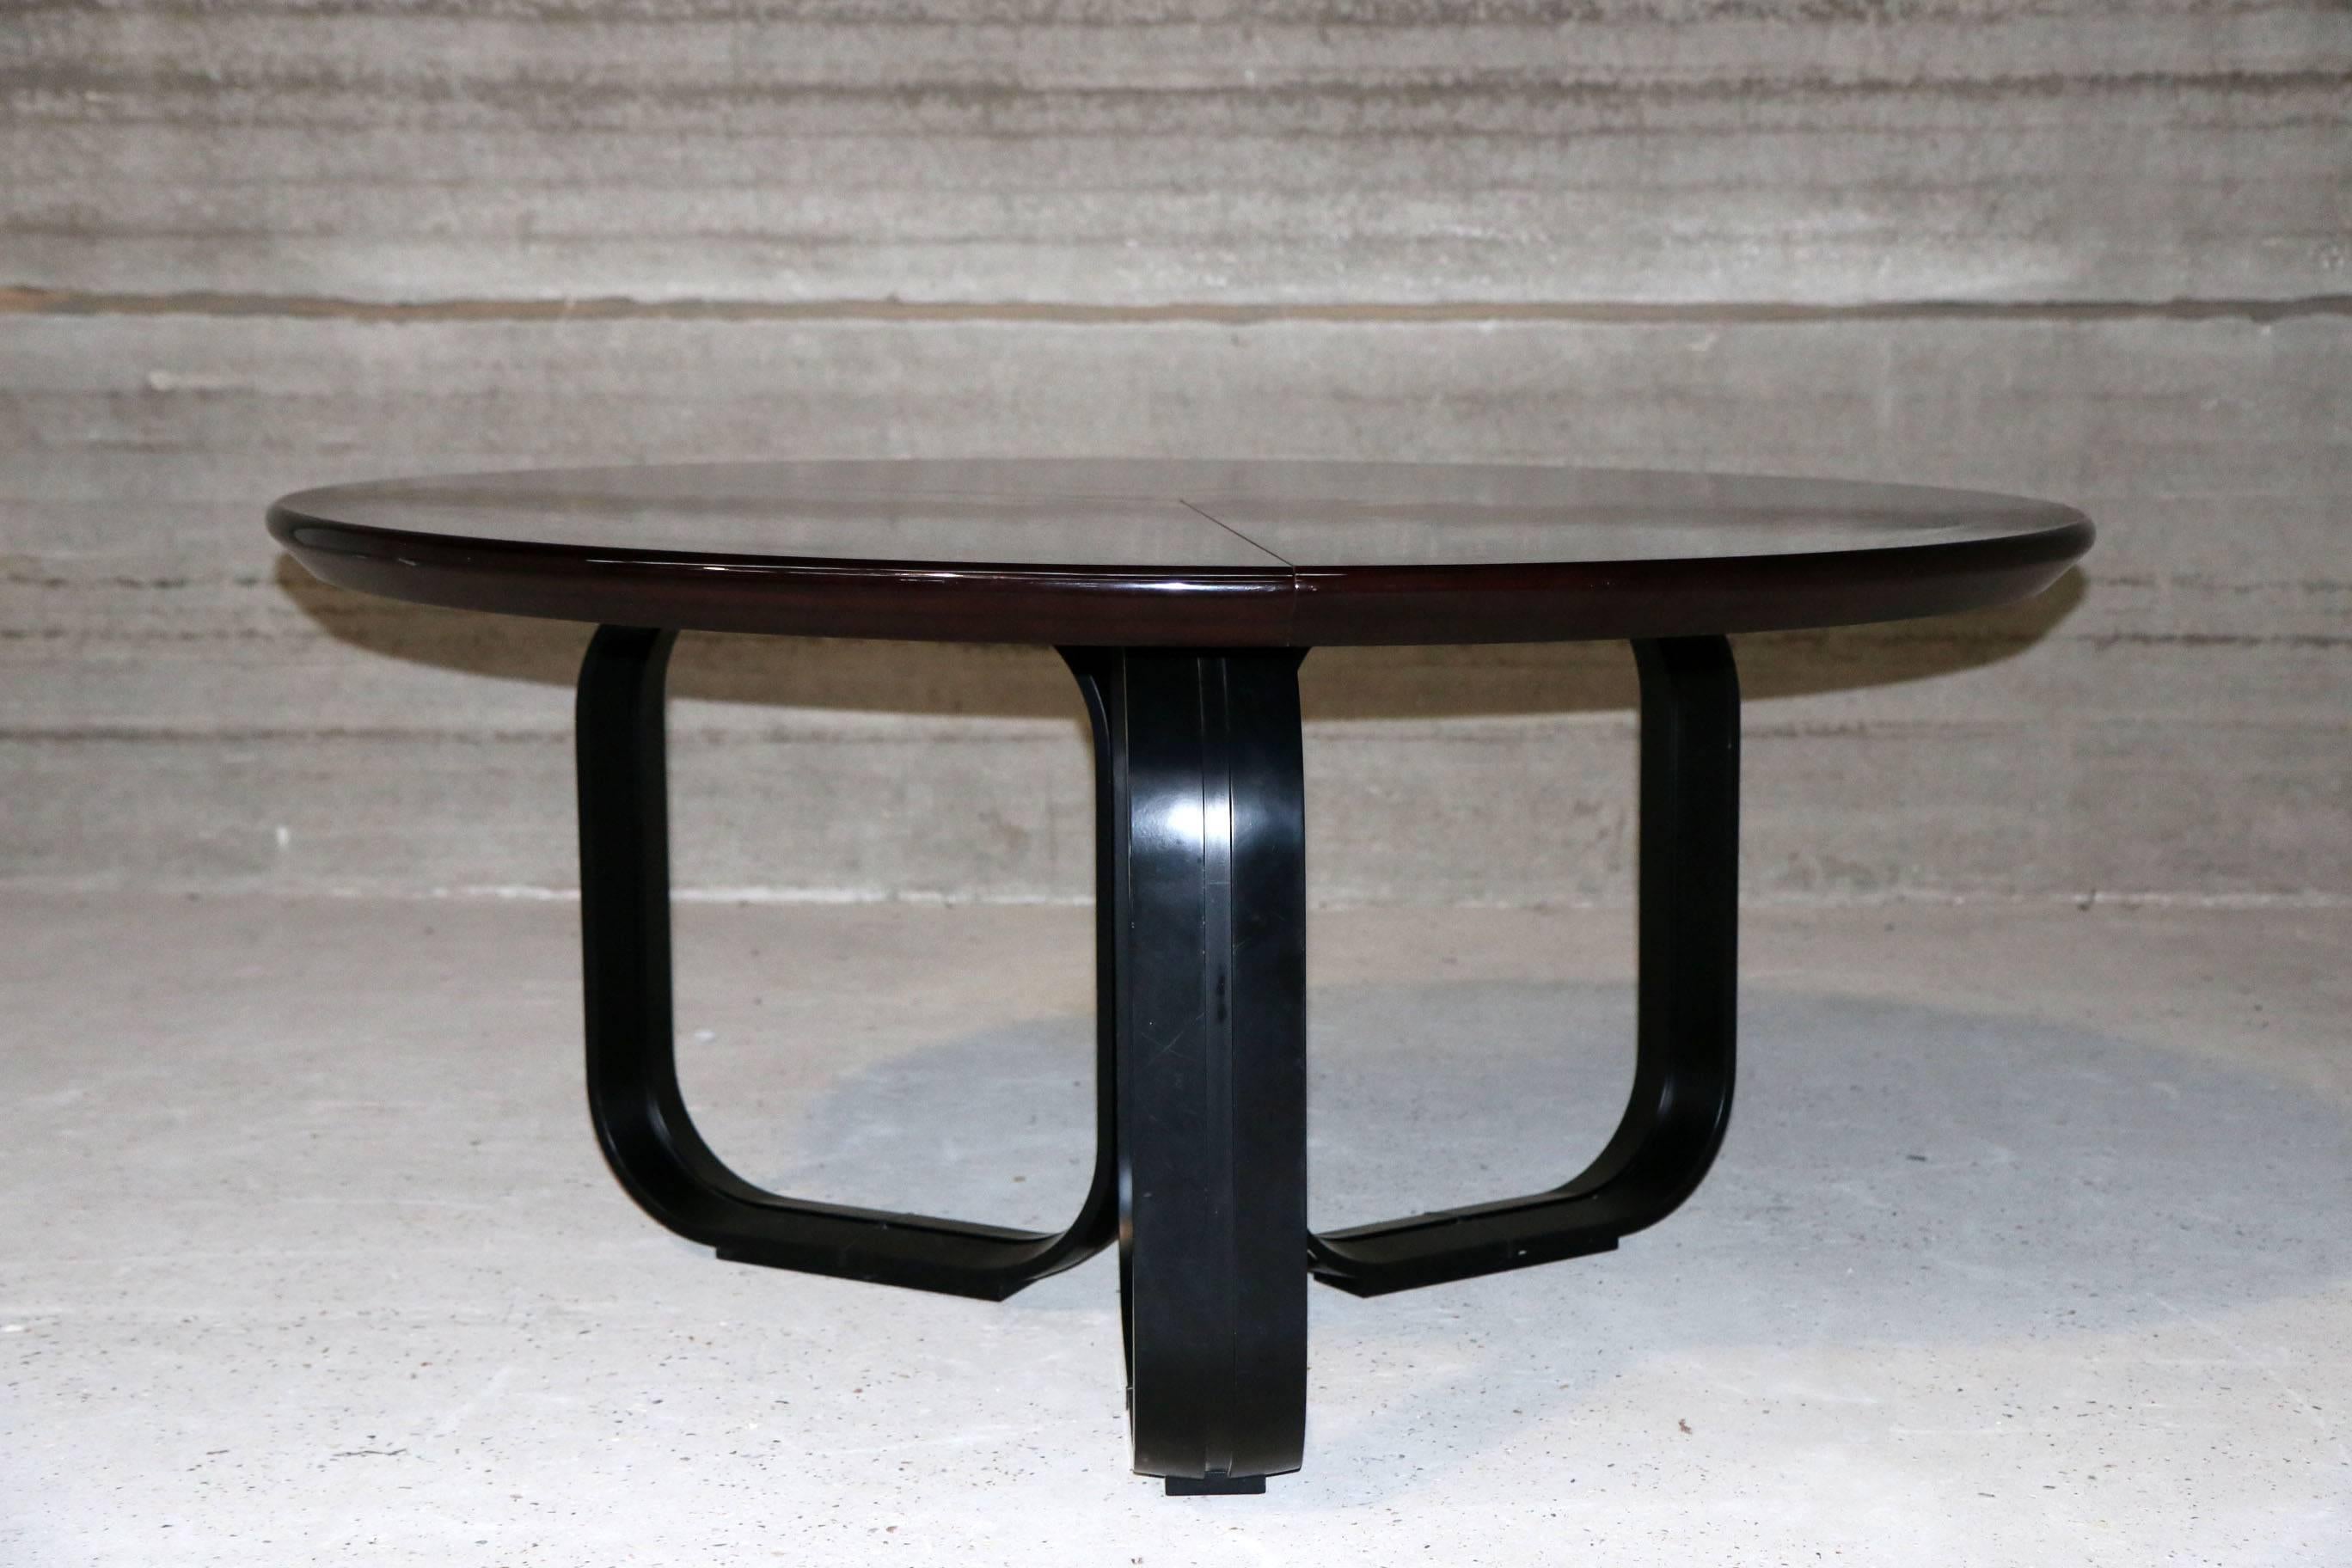 Walnut round table by Ico Parisi for MIM Roma
Can be used as conference table too.
Very solid and heavy. Tabletop and black metal base in very good condition.